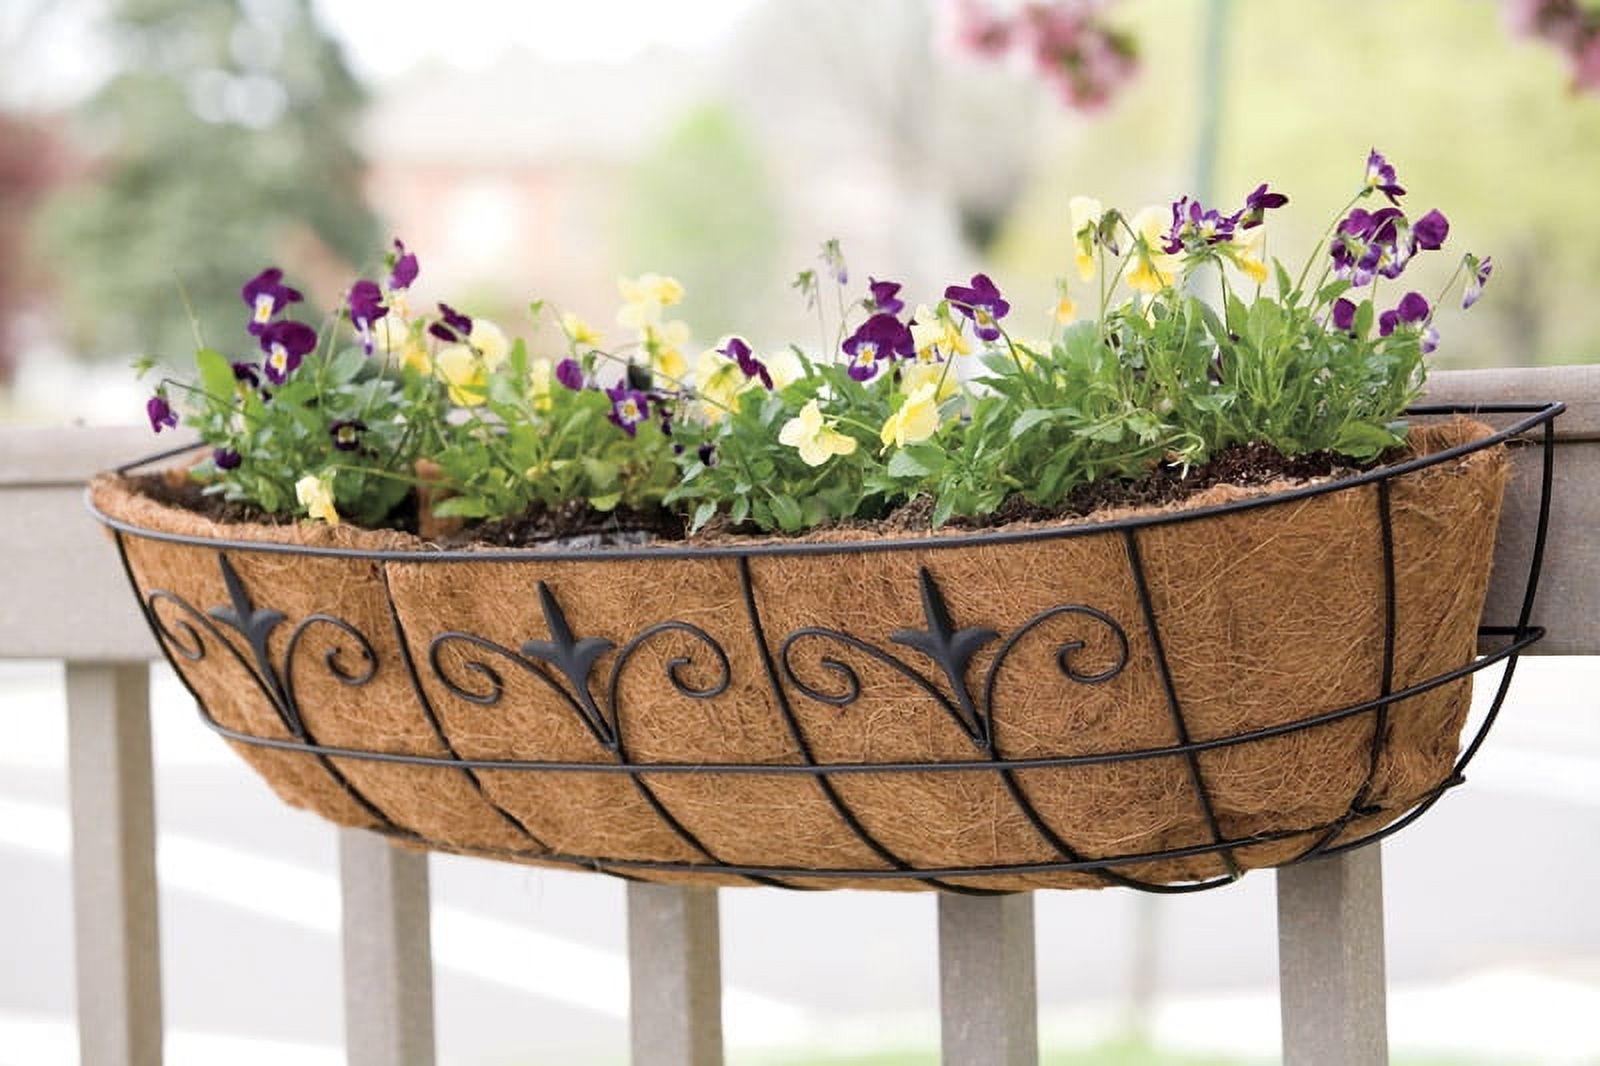 Living Accents 8" x 30" Black Steel Window Planter - image 1 of 2